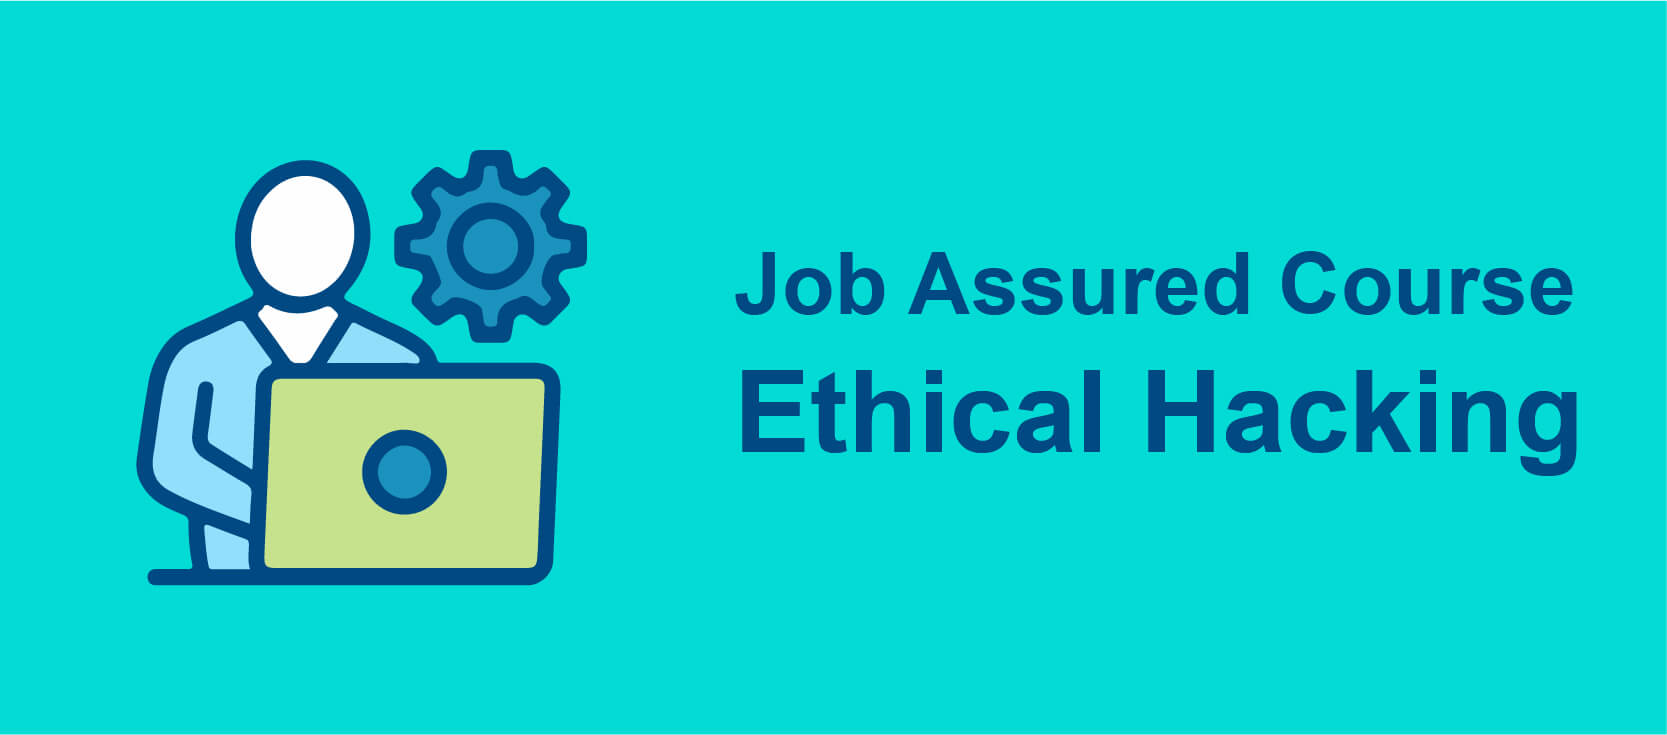 Ethical Hacking Job Assured Course